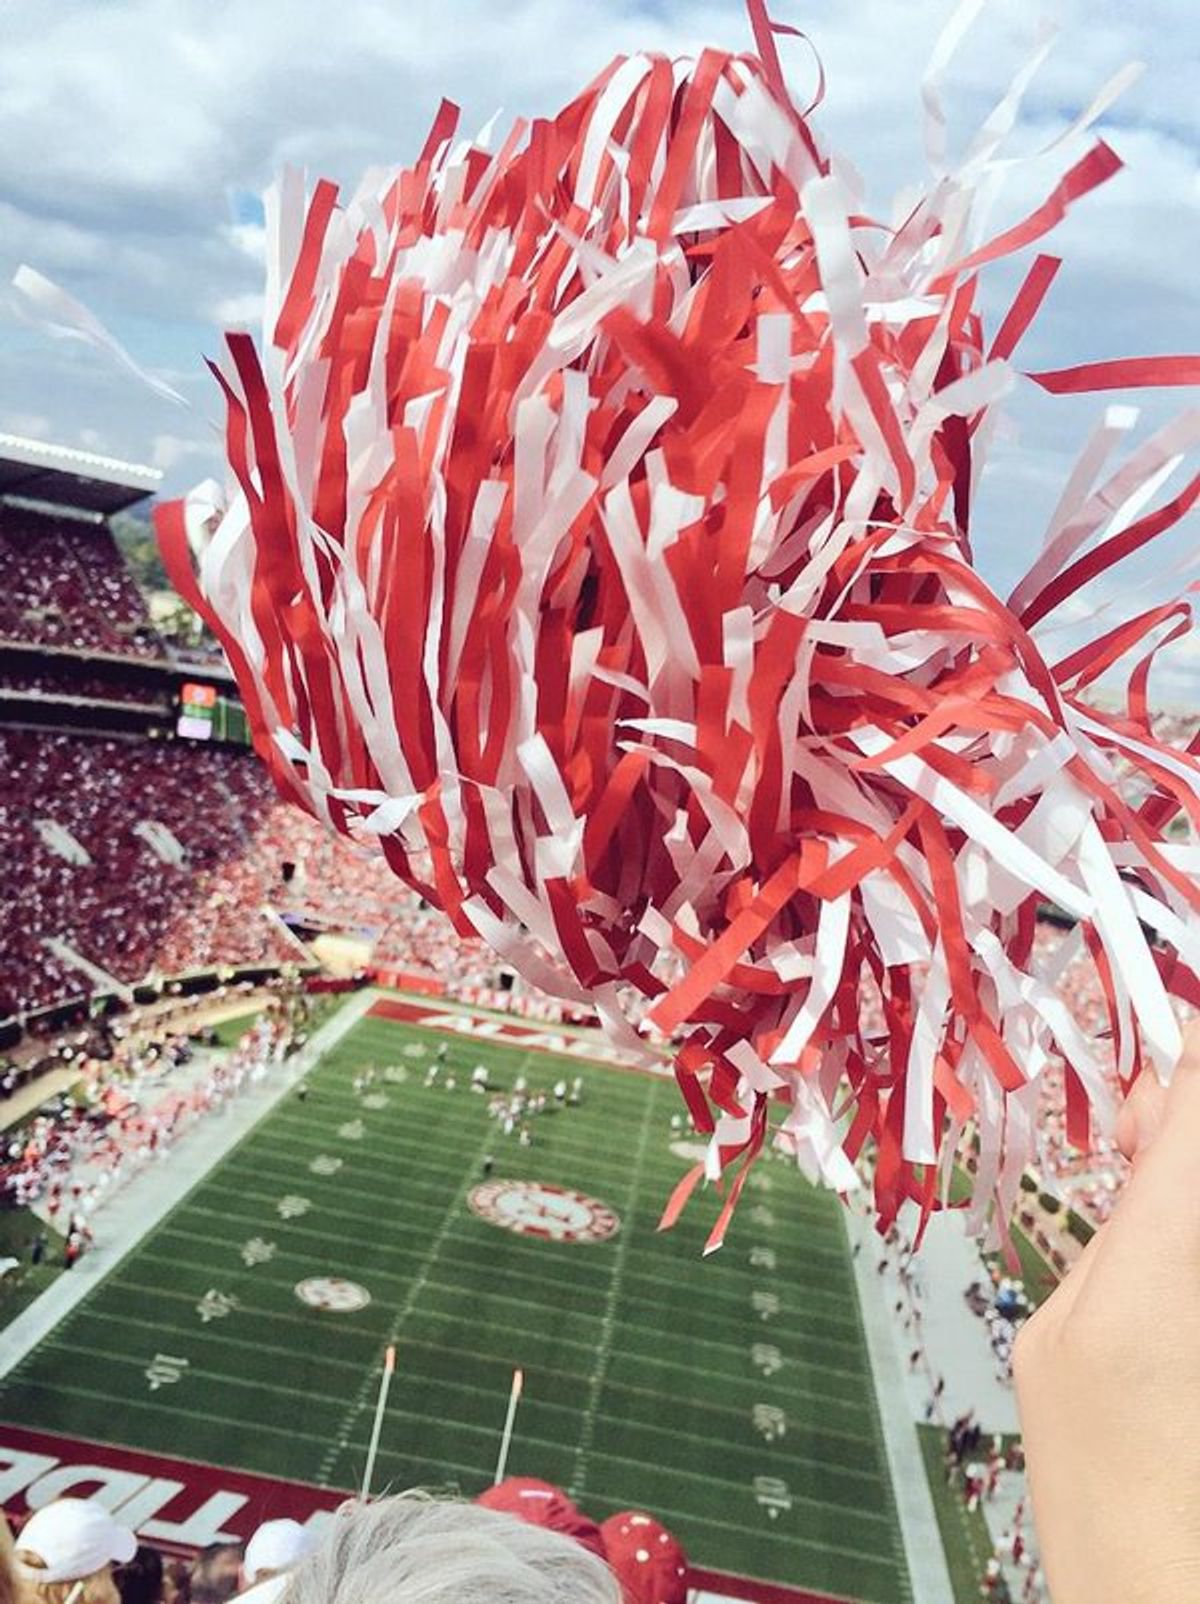 5 Reasons Why The University Of Alabama Is The Best School In The Nation